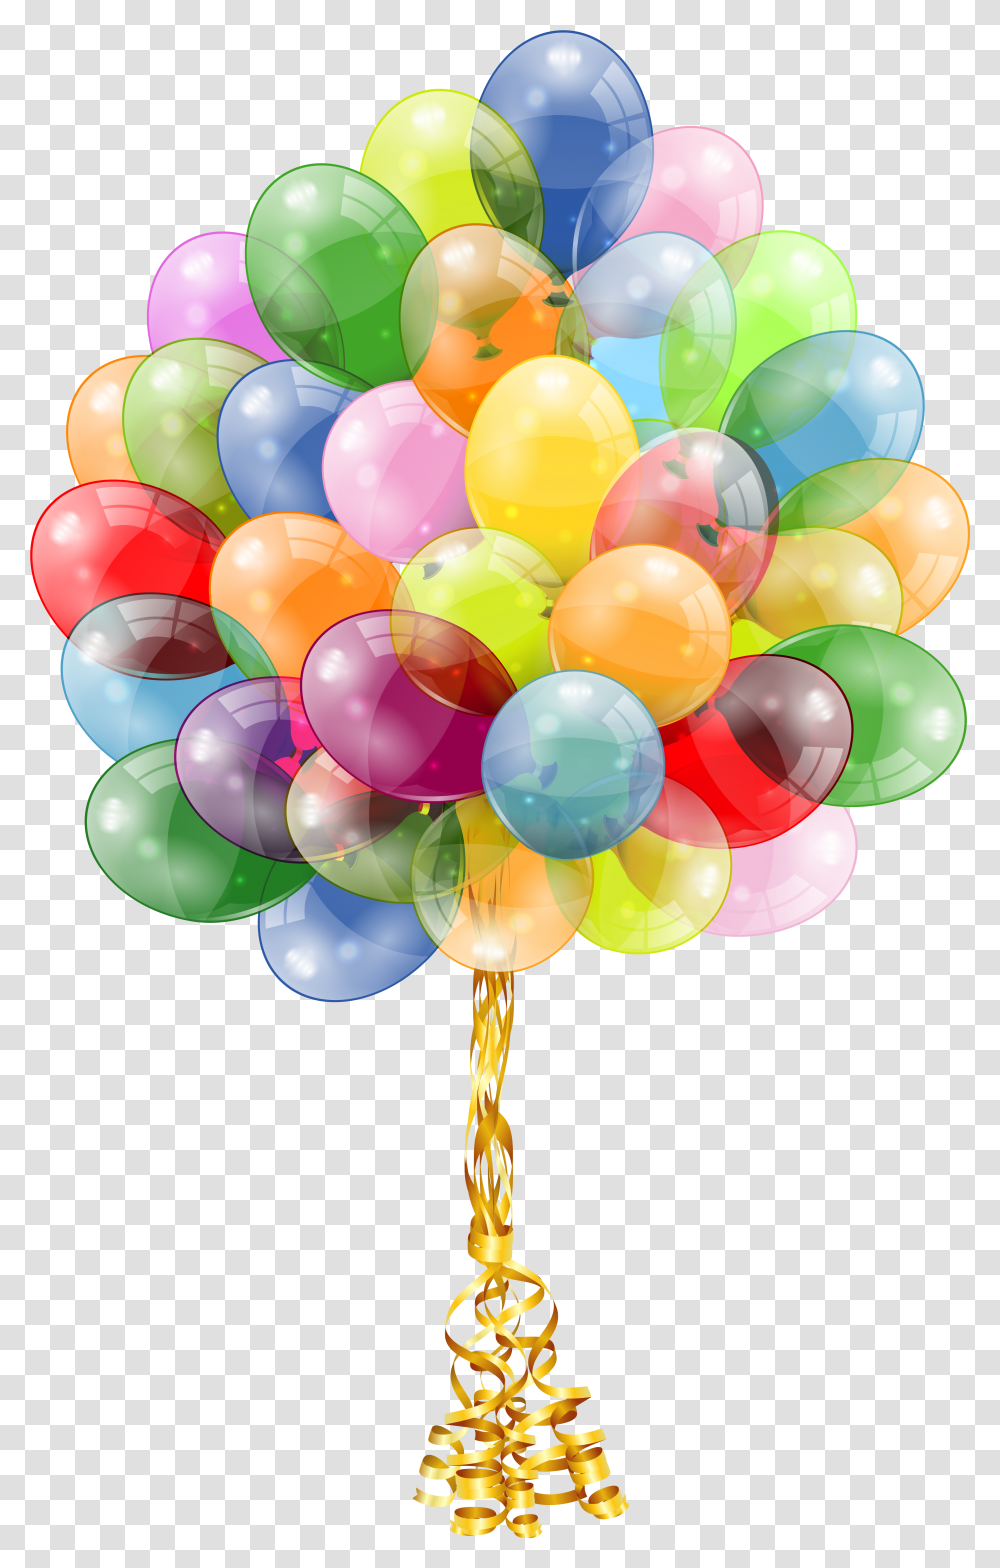 Real Balloon Bunch Of Balloons Background Transparent Png